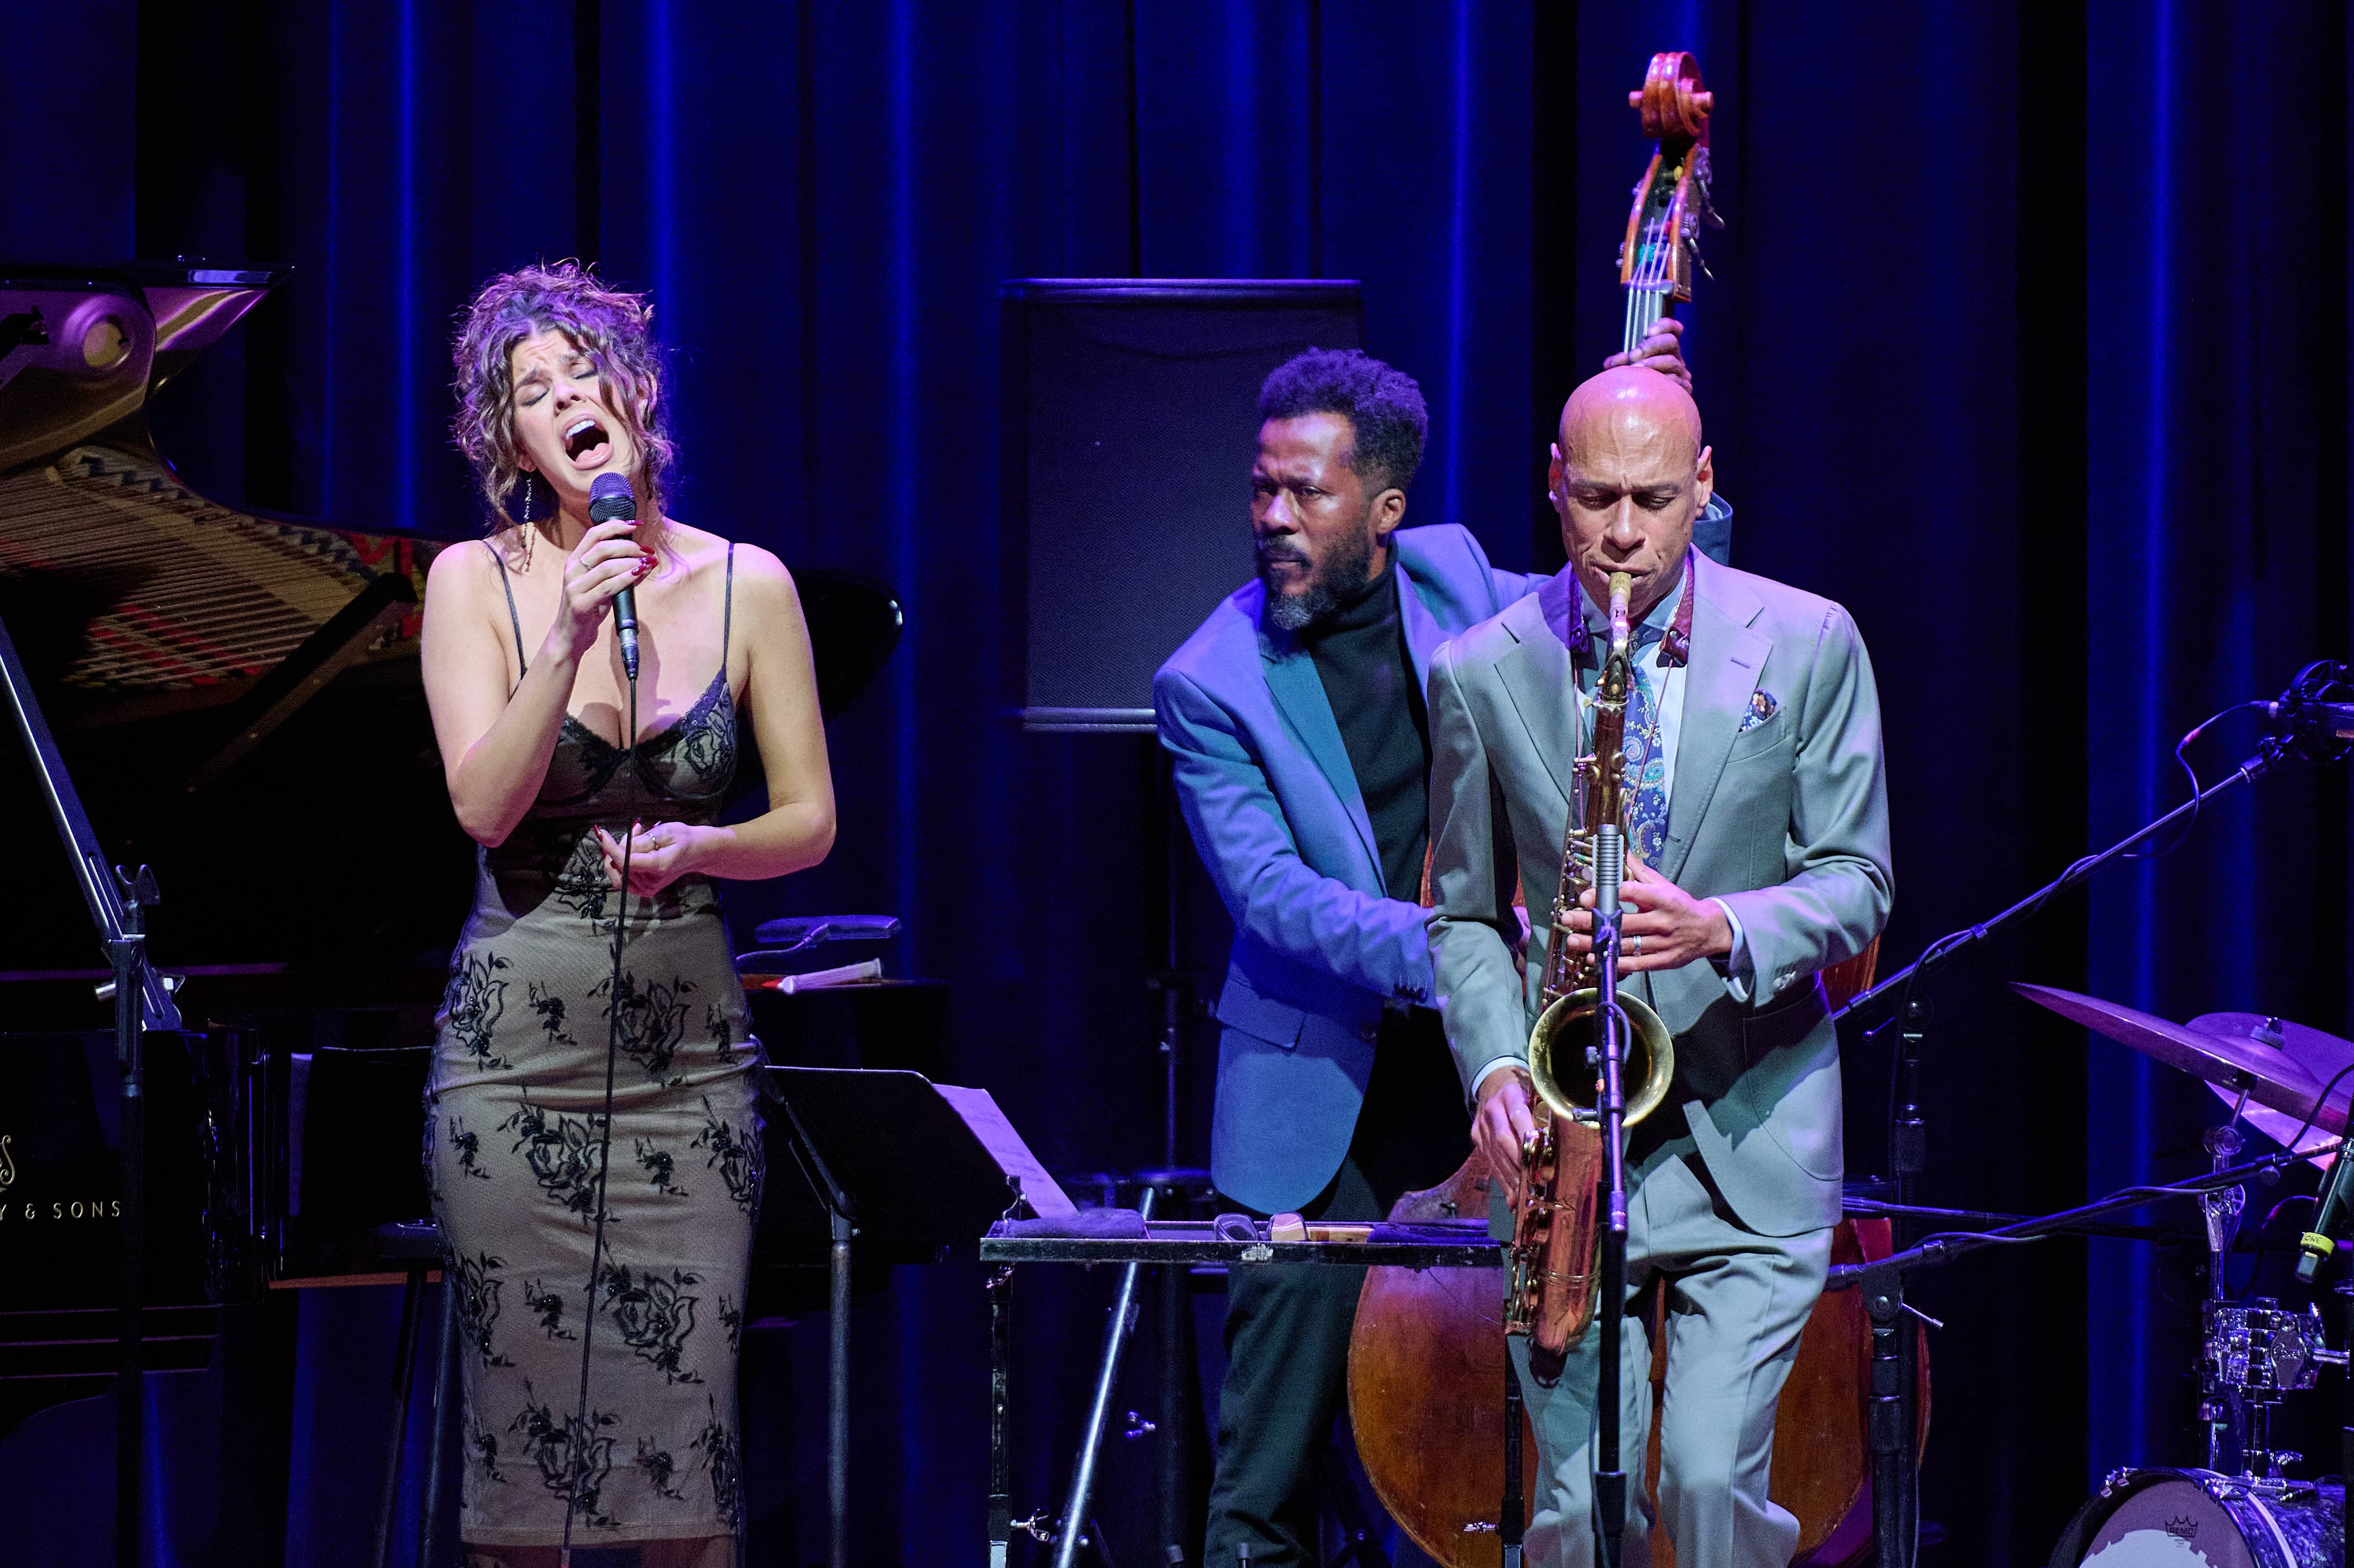 Joshua Redman's Old-Fashioned Idea — Songs About American Cities